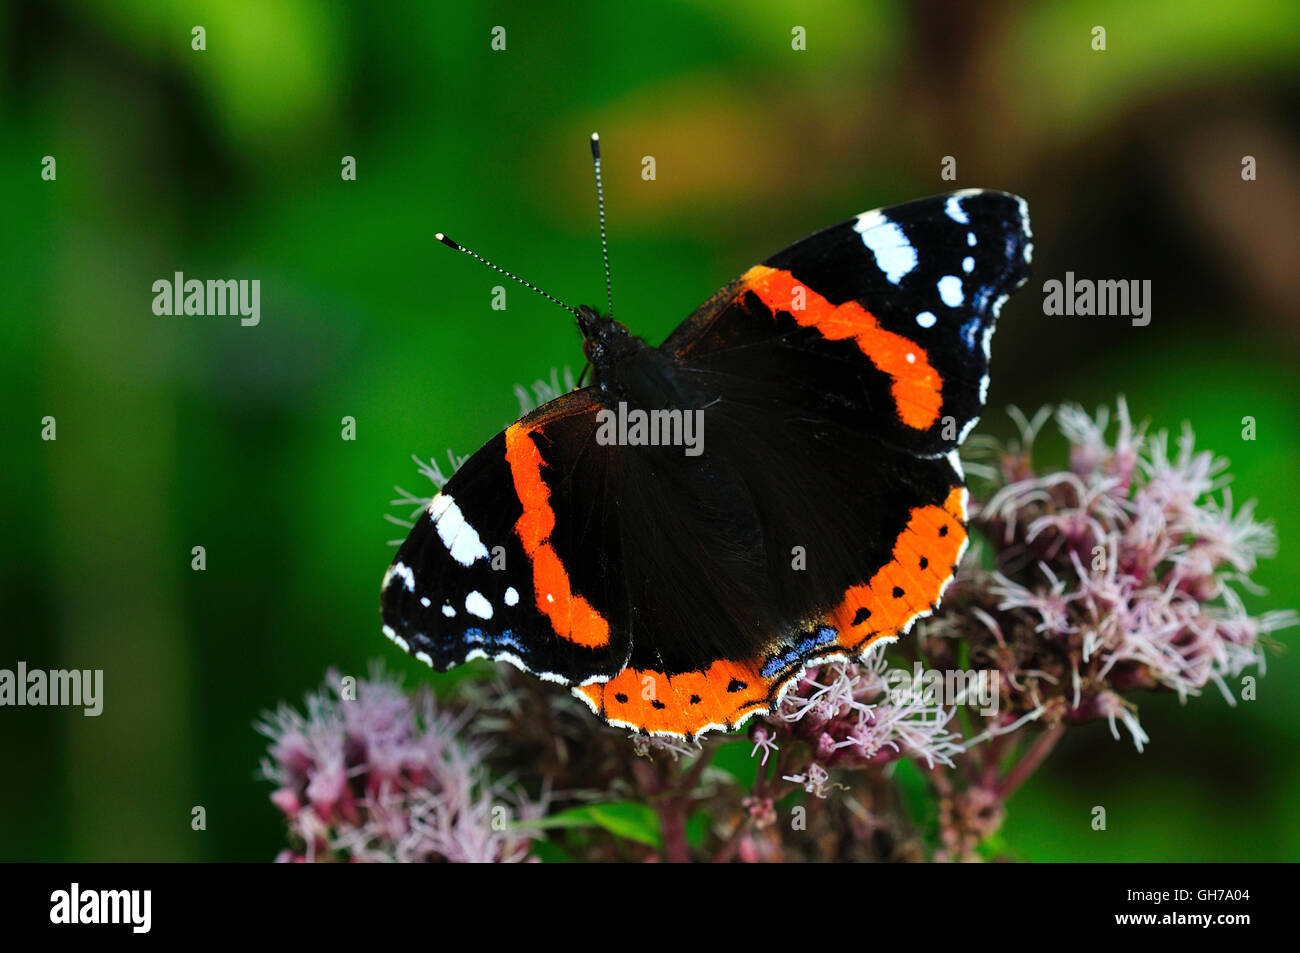 A red admiral butterfly at rest UK Stock Photo